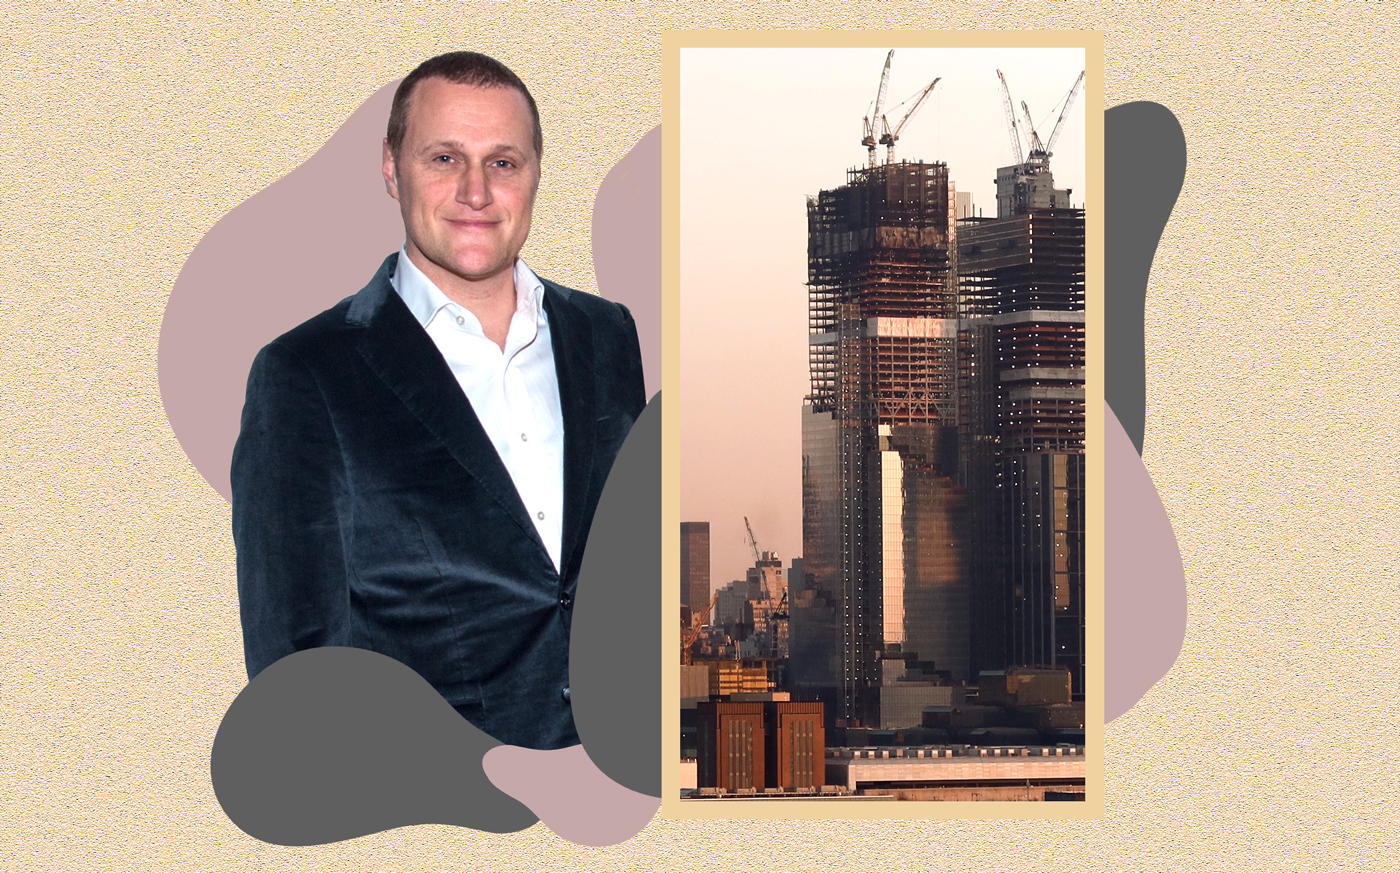 Tishman Speyer CEO  Rob Speyer and The Spiral as seen on January 21, 2021 (Photos via Getty Images; Illustration by Kevin Rebong)